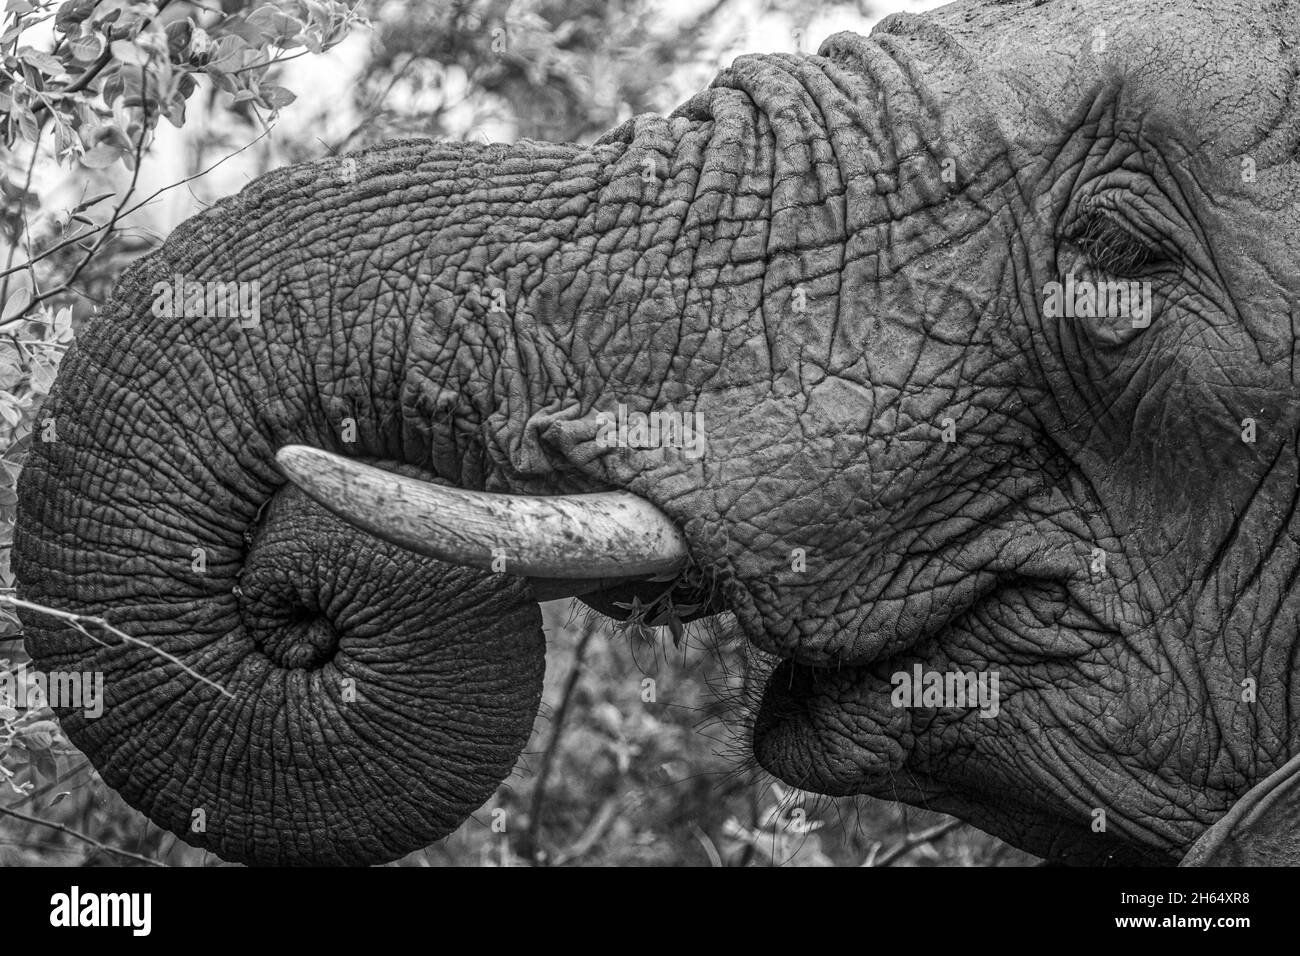 Elephant in the bushes in South Africa Stock Photo